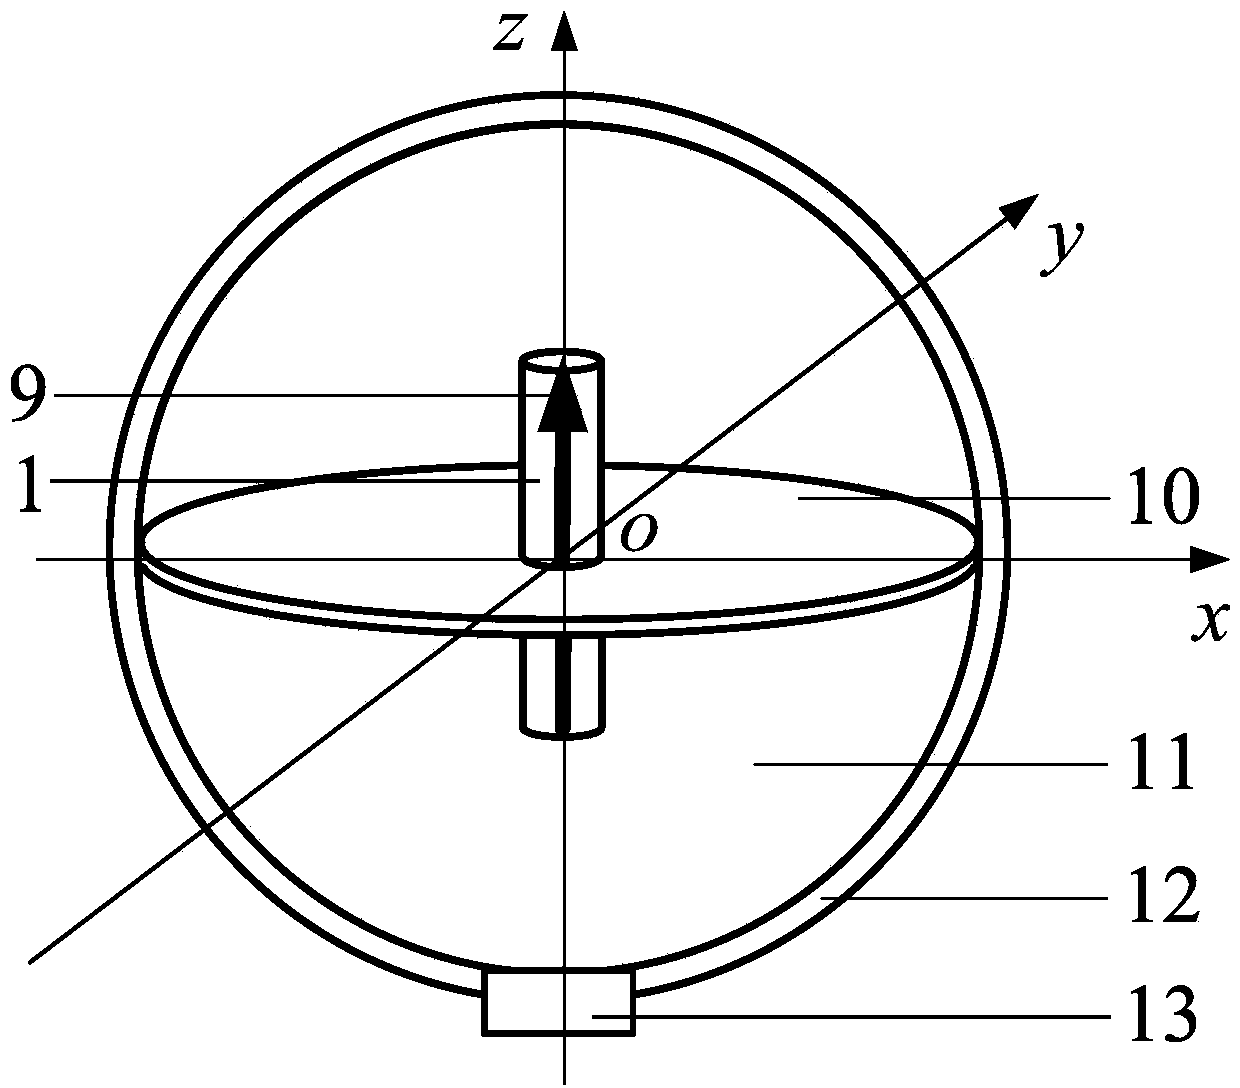 Linear positioning method based on marked magnetic source with permanent magnetic dipole moment